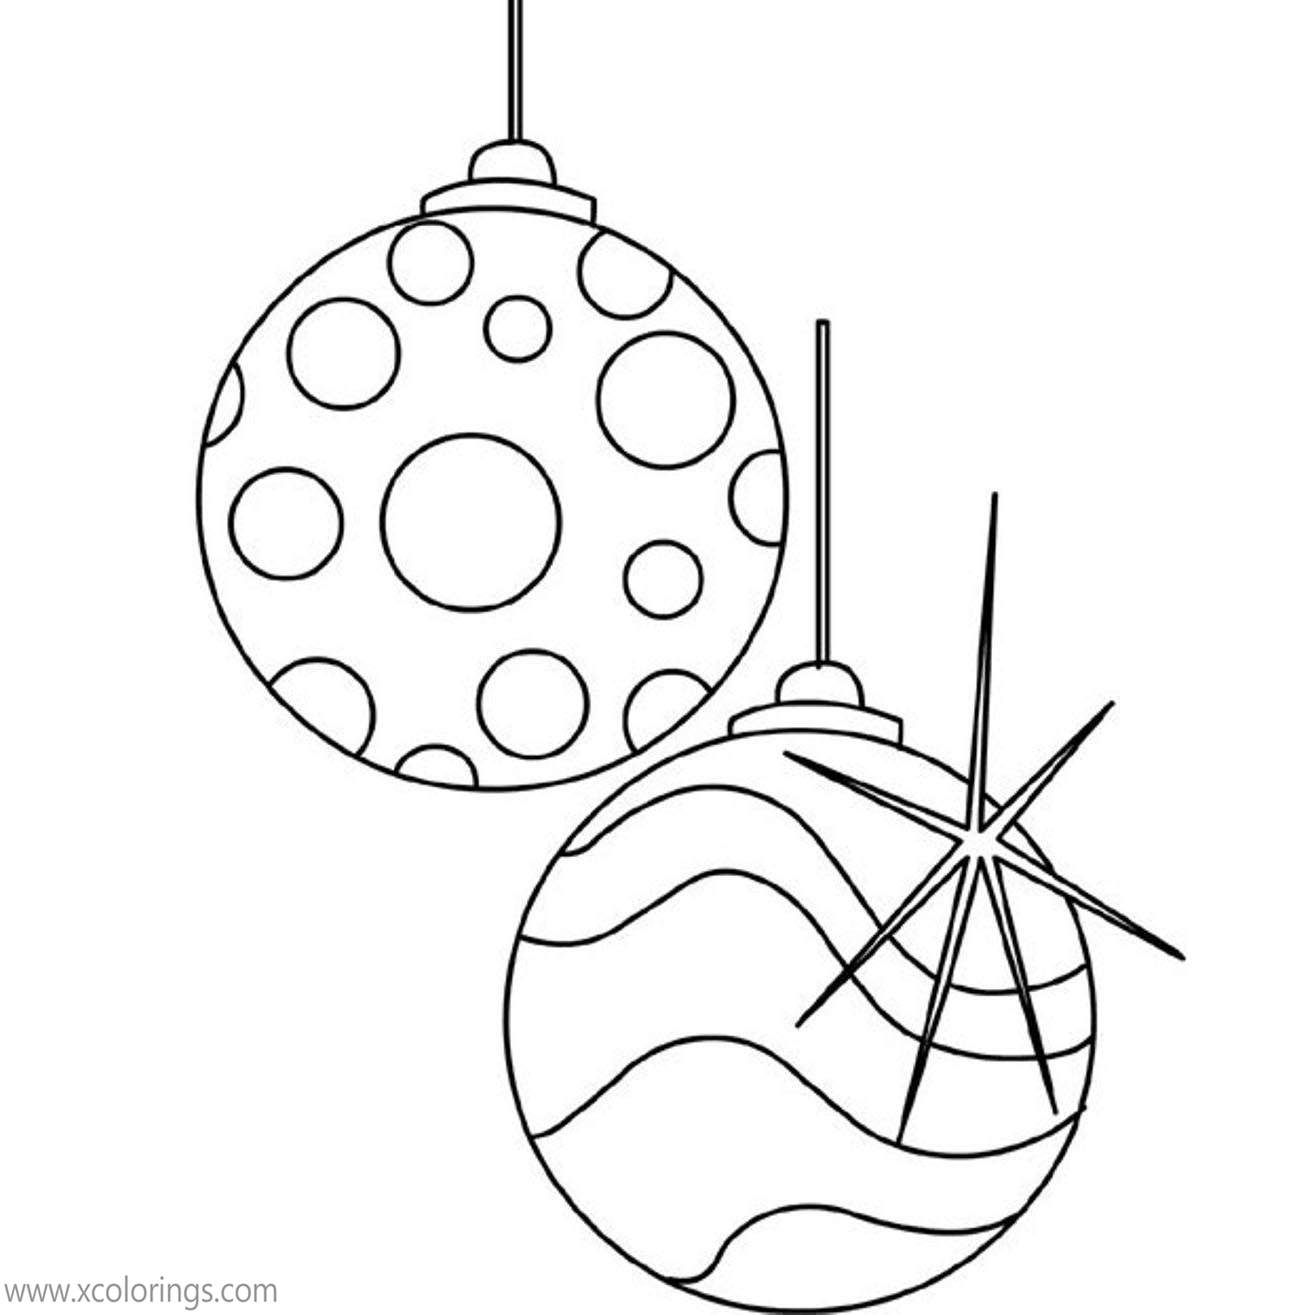 Free Two Christmas Ornaments Coloring Pages printable